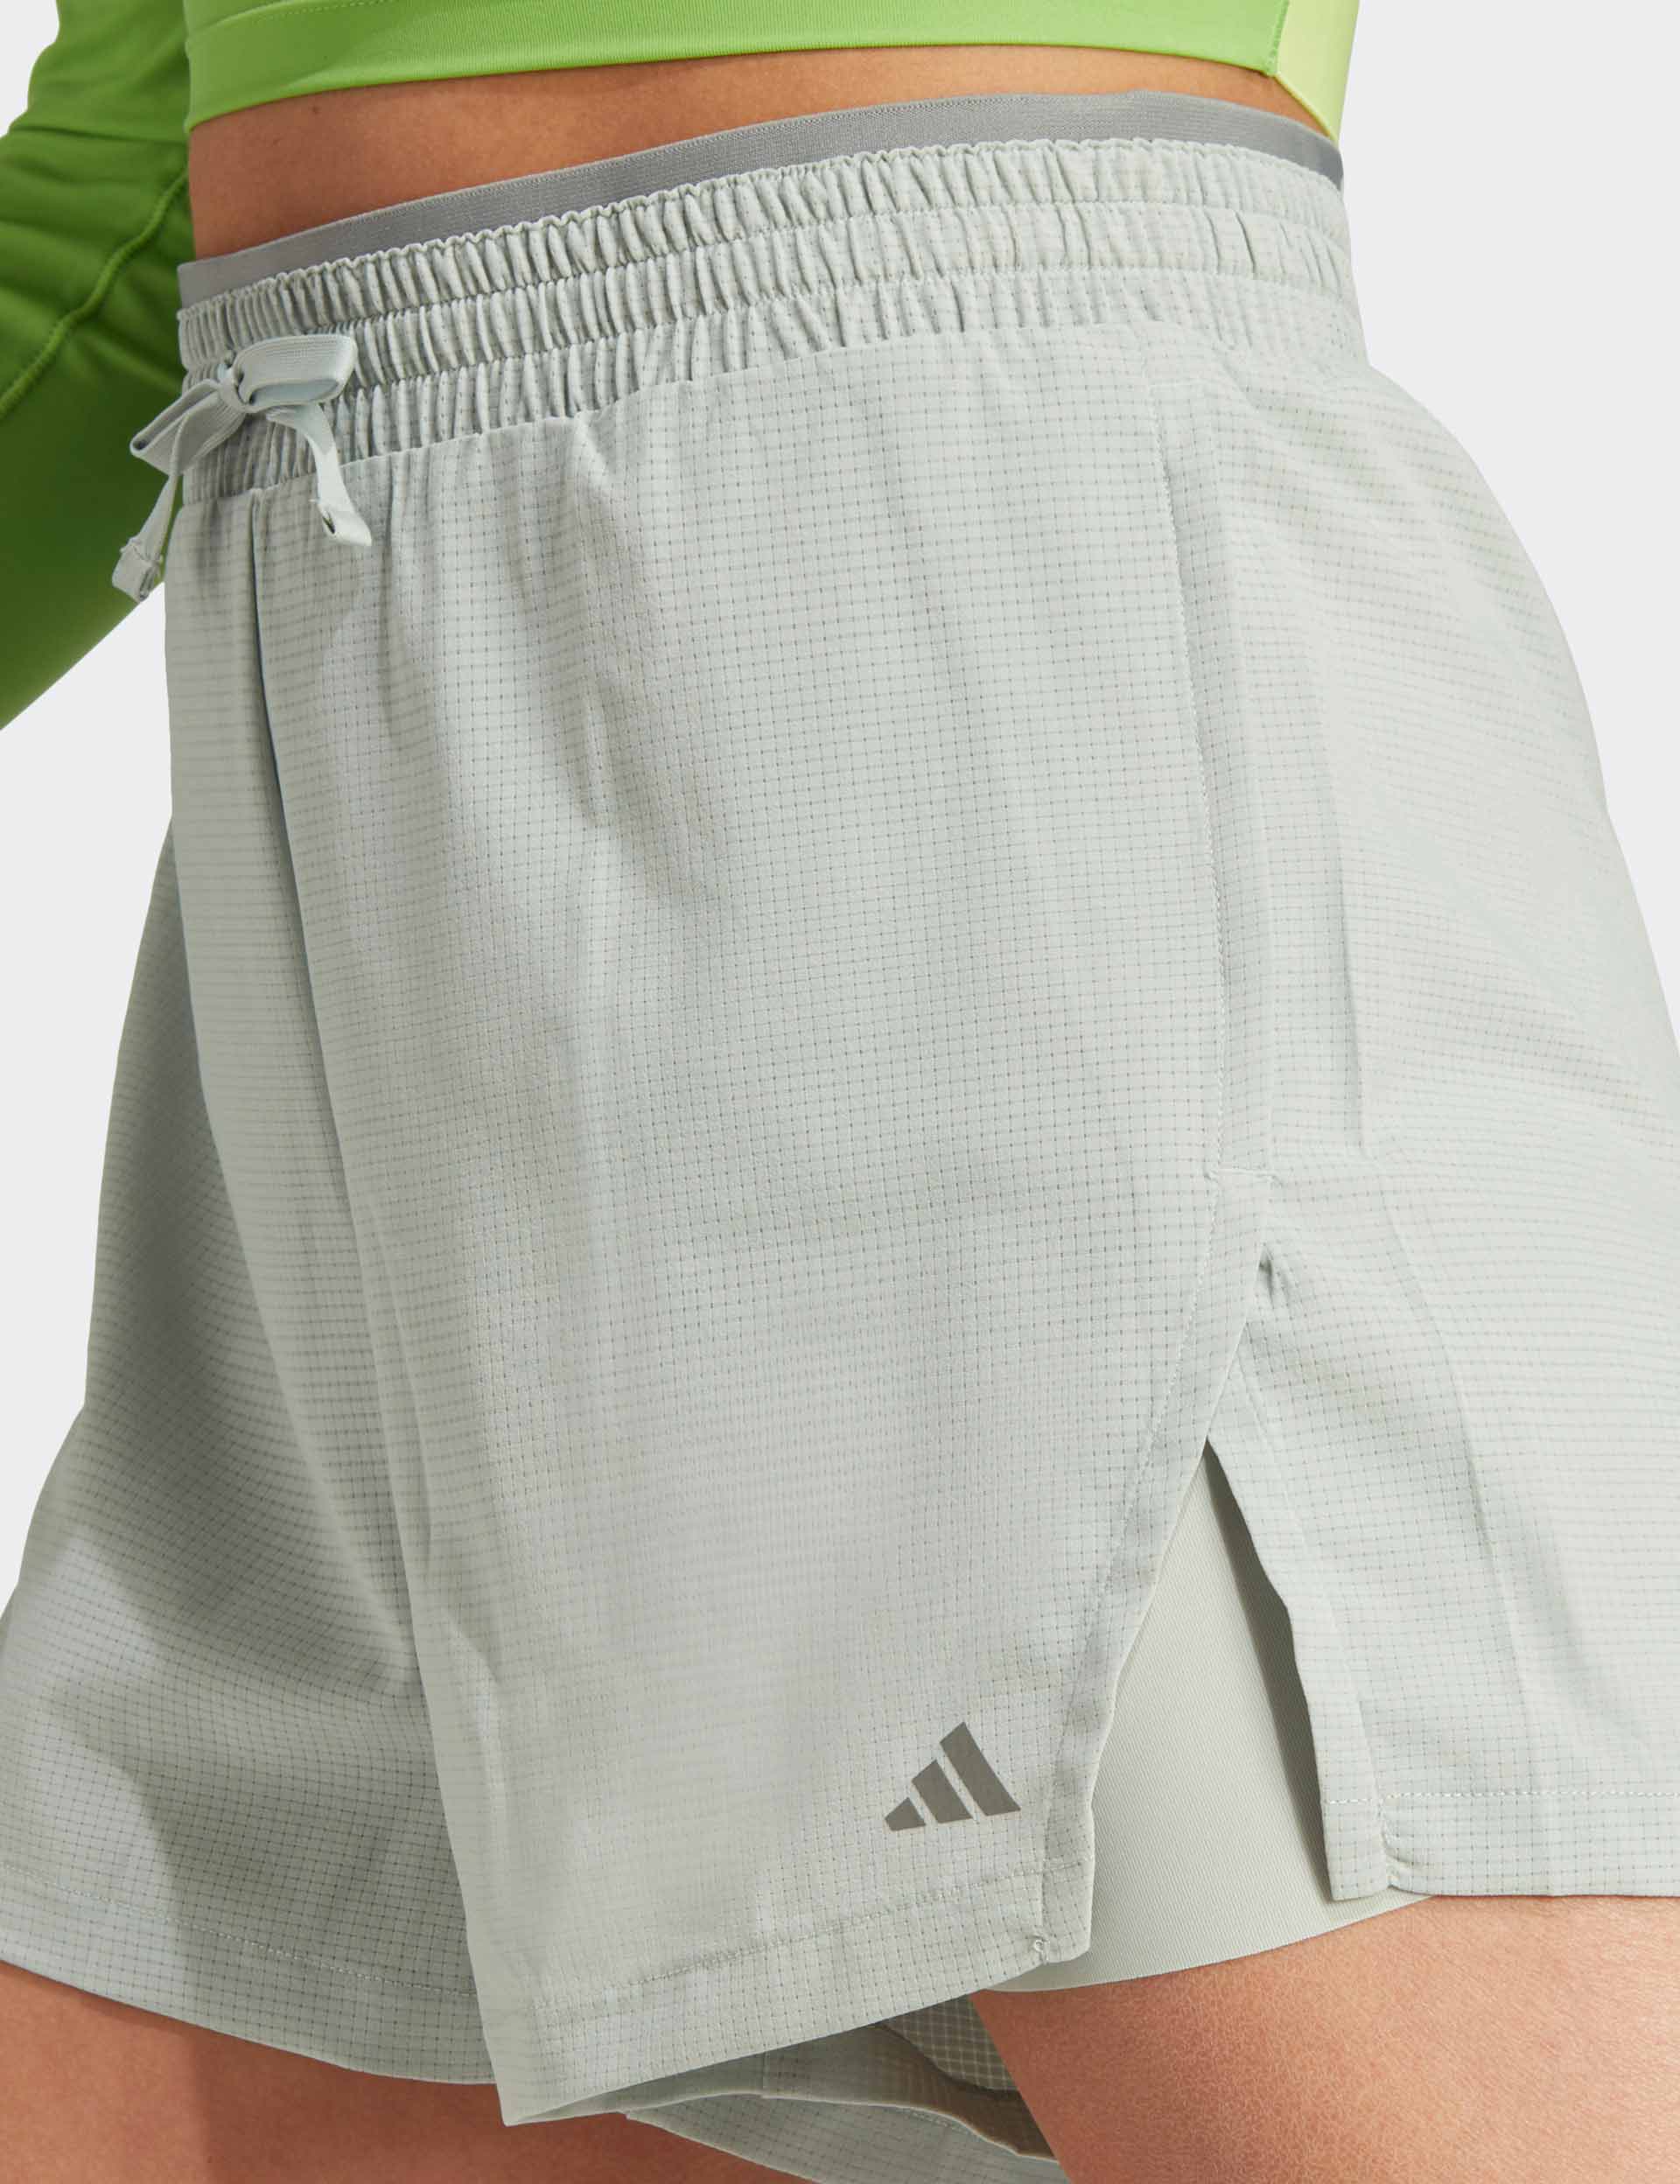 adidas | HIIT HEAT.RDY Two-in-One Shorts - Silver | The Sports Edit